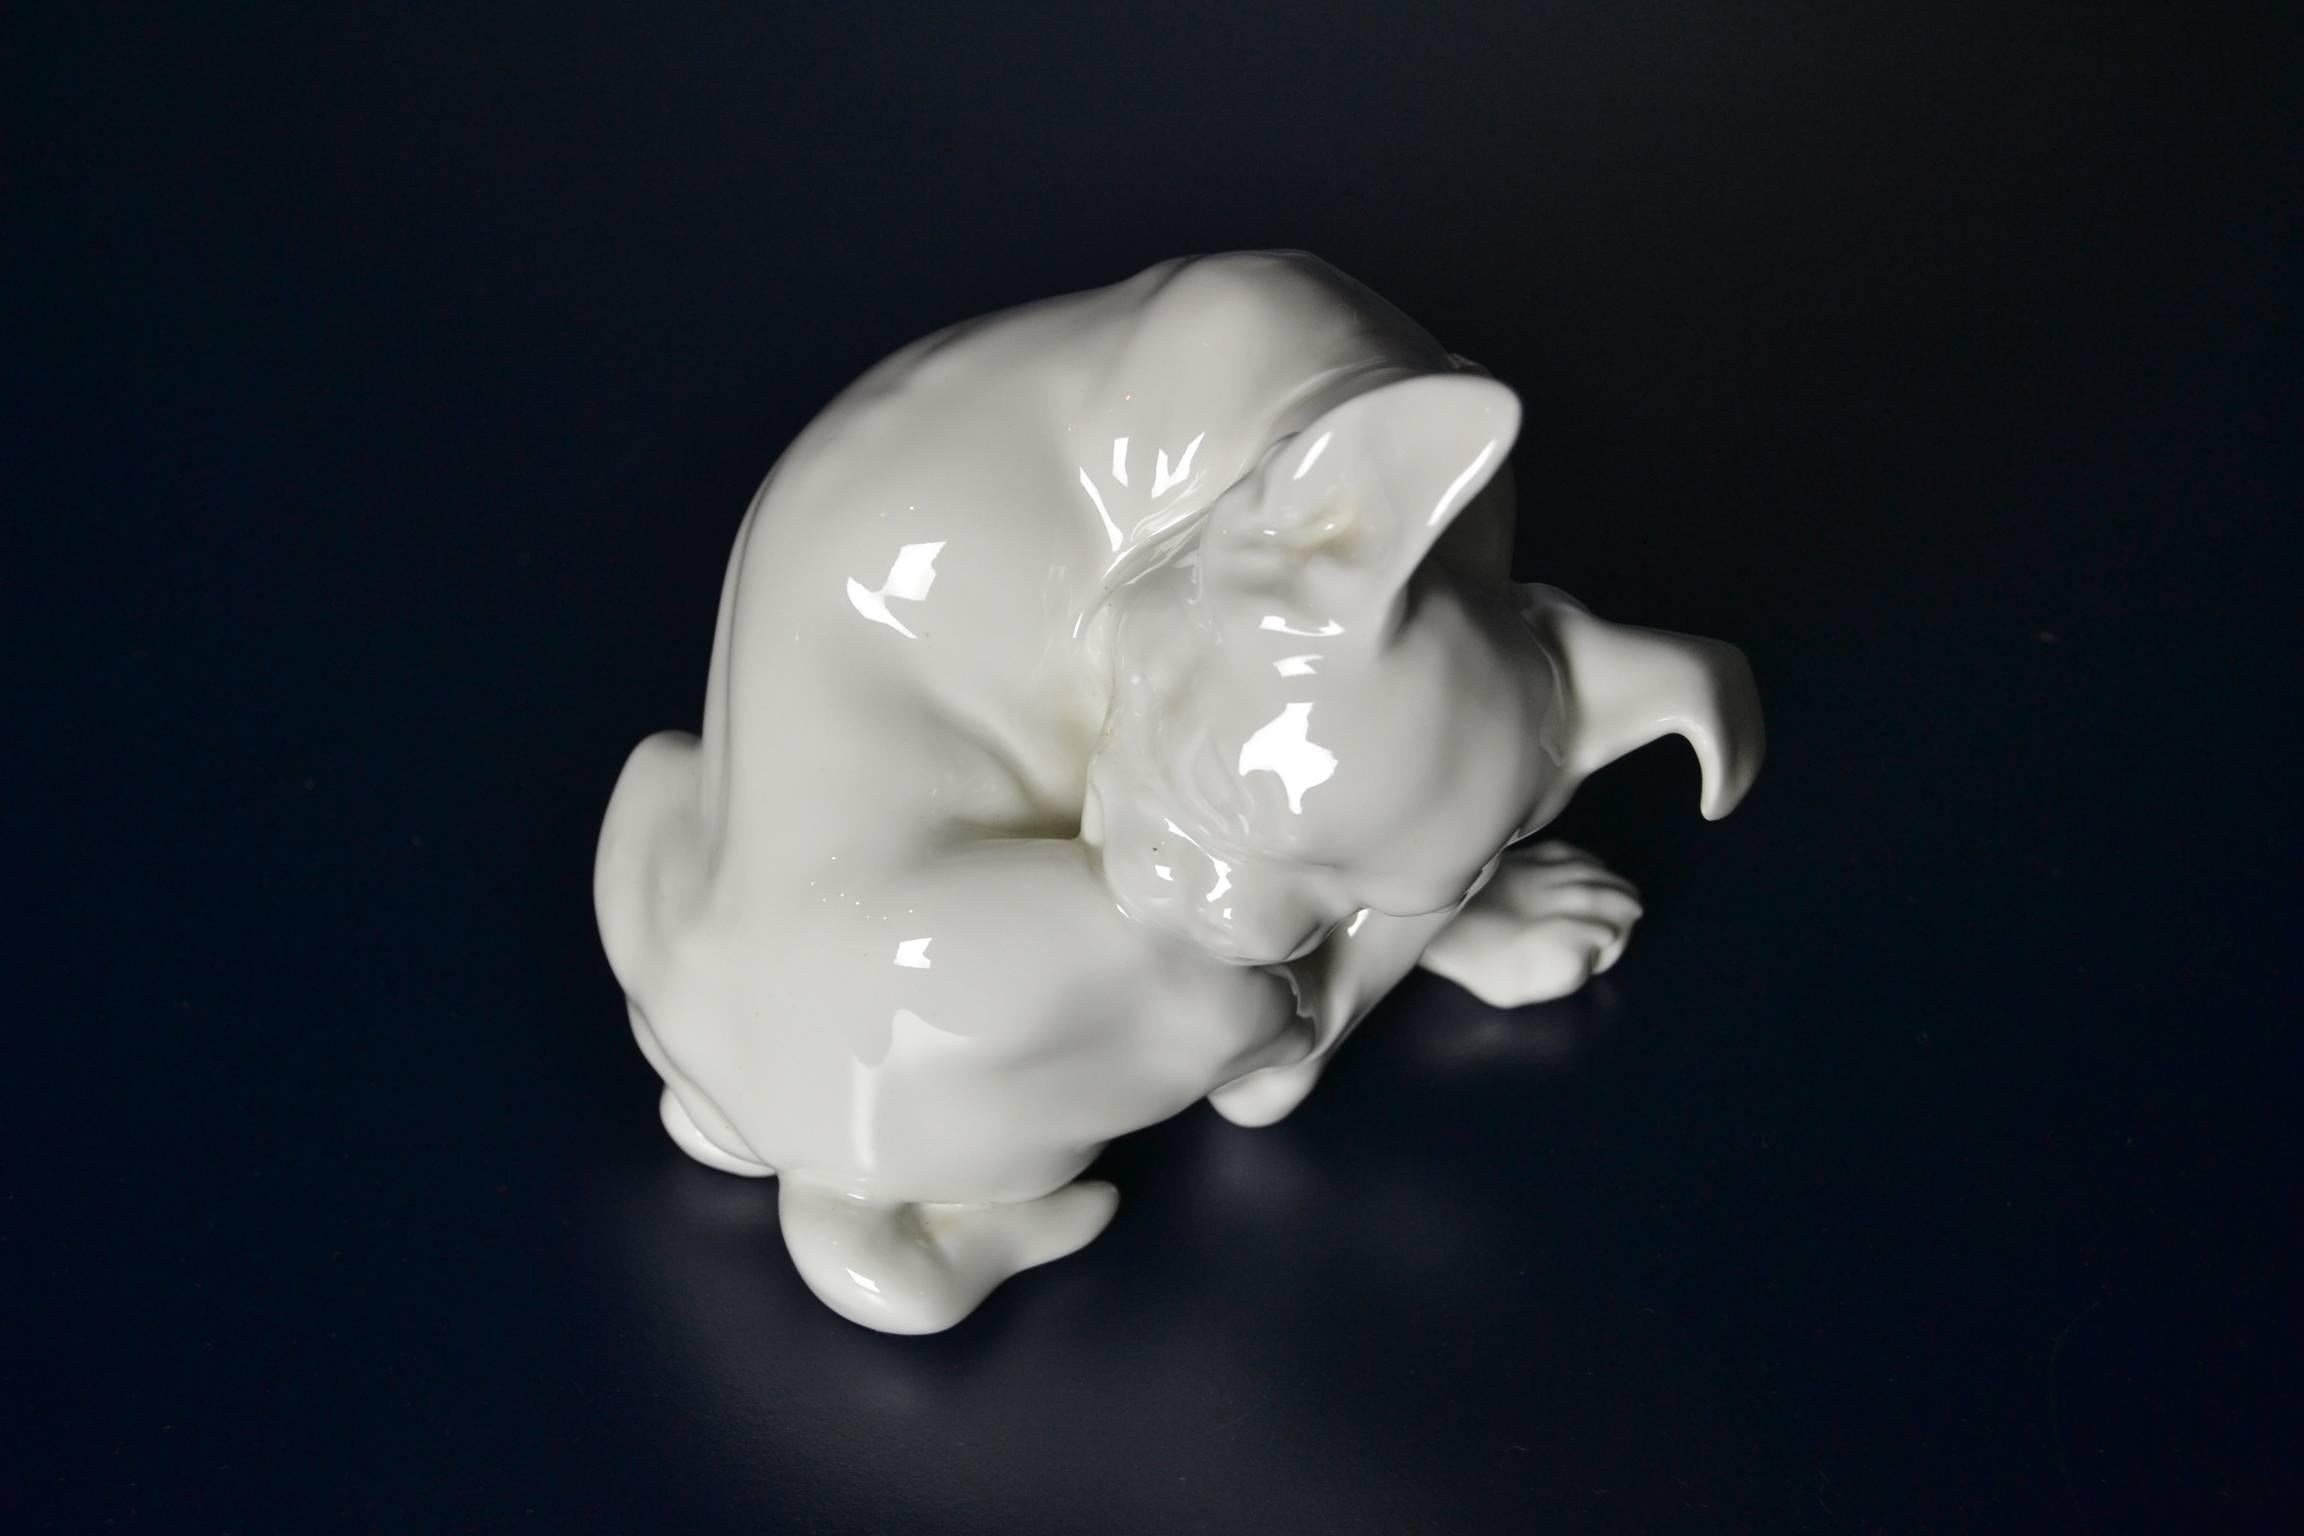 French bulldog white porcelain dog figurine statue.
Made by Company Meissen from Germany in the 1930s.
Stamped and numbered. 

